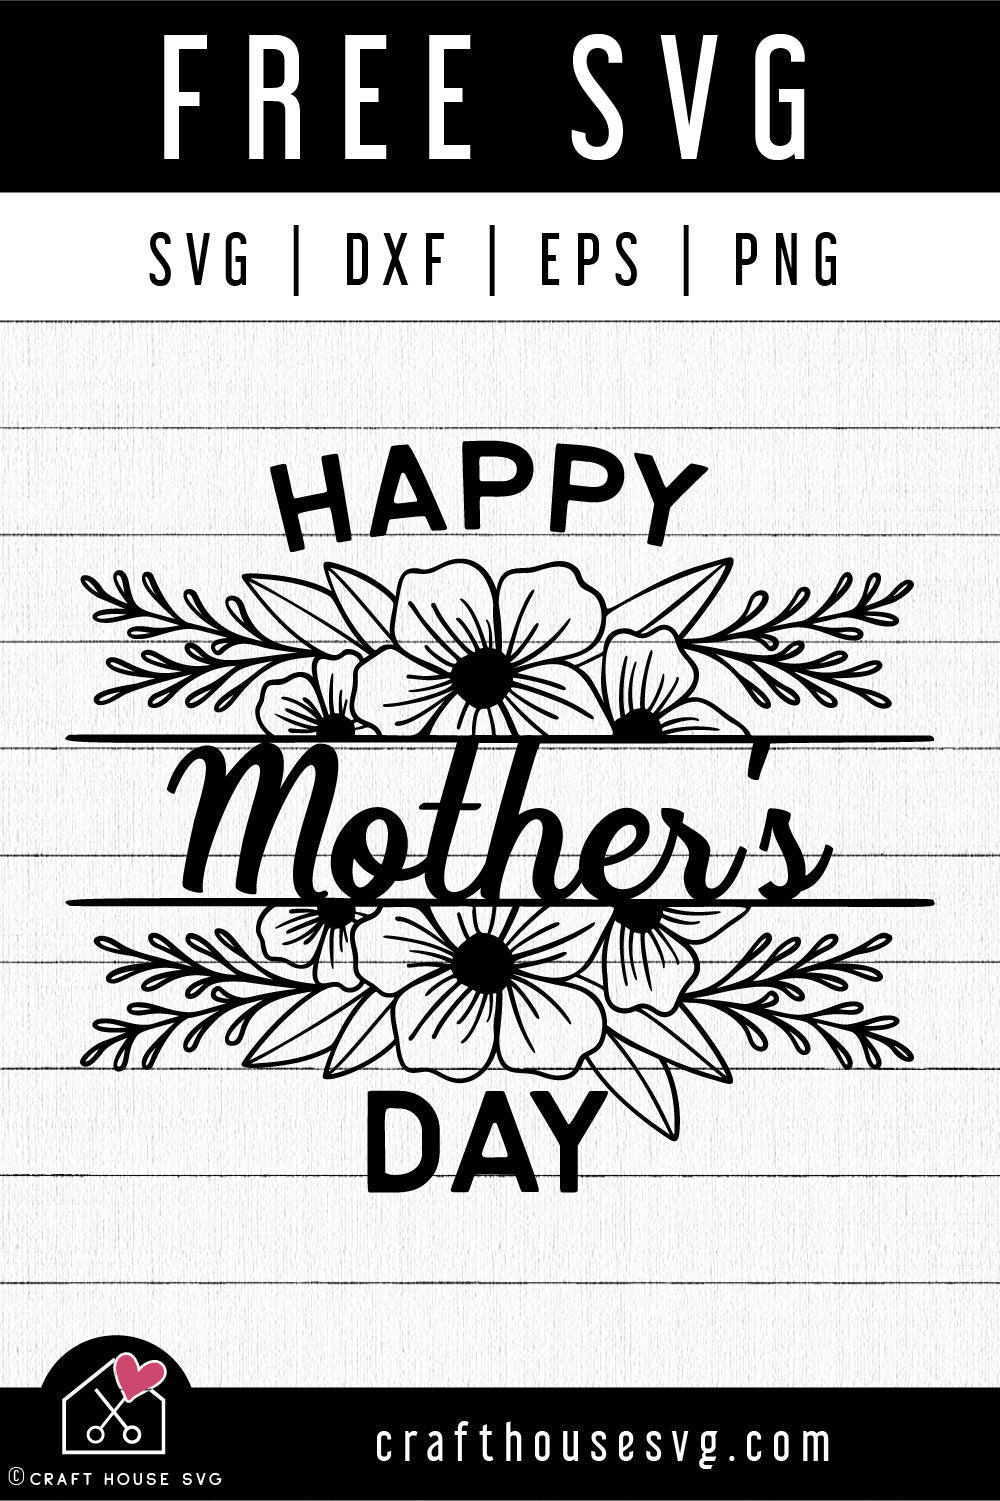 FREE Happy Mothers Day SVG | Mothers Day SVG - Craft House SVG